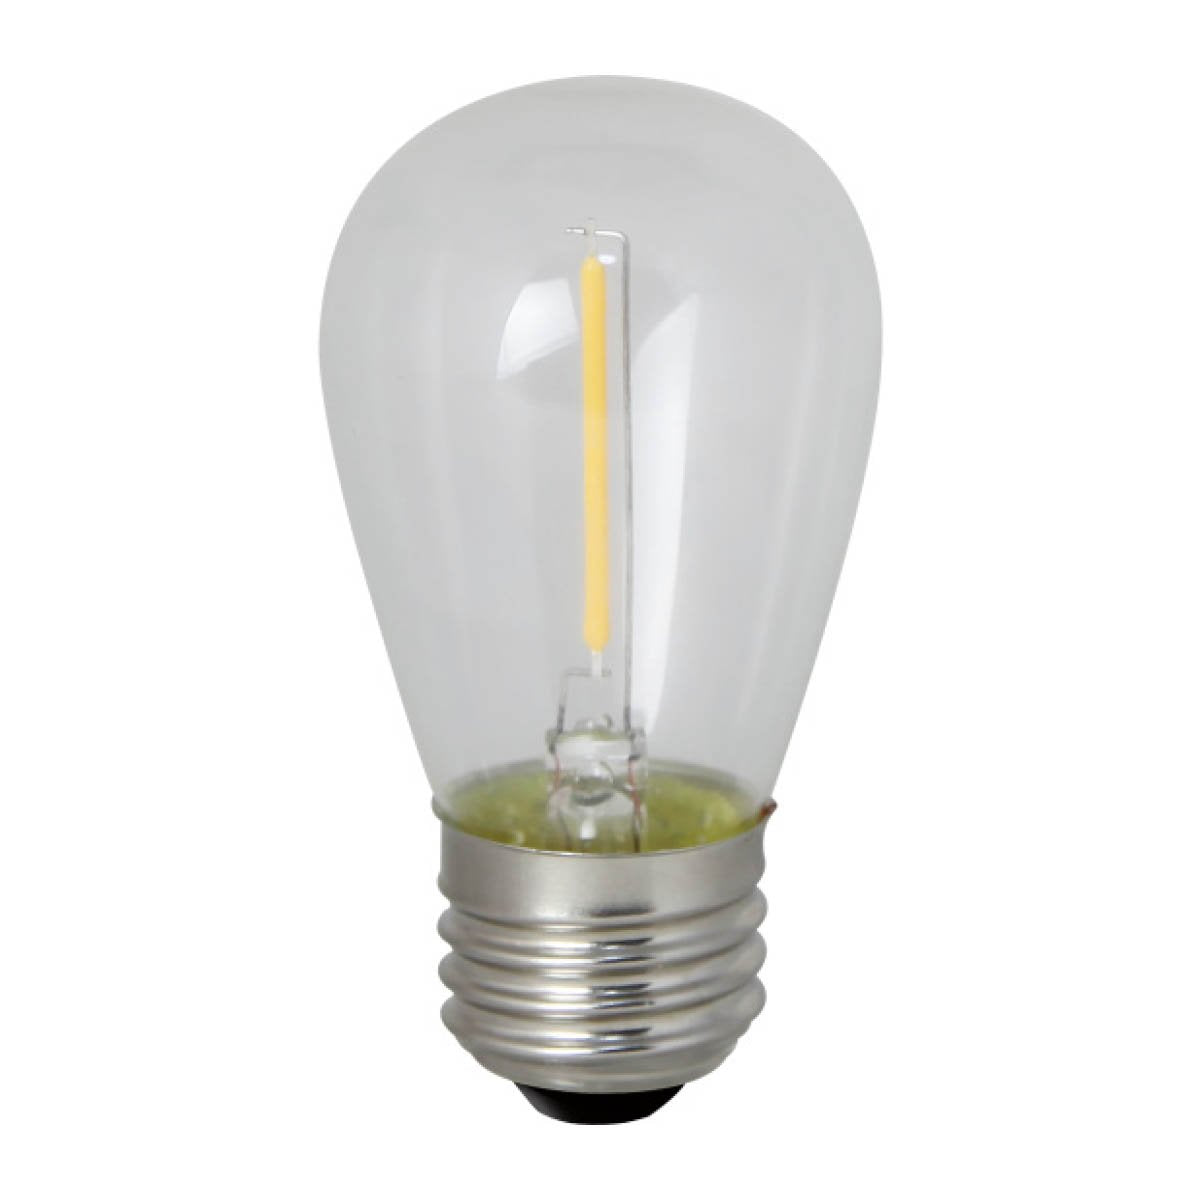 BULBRITE LED S14 MEDIUM SCREW (E26) 0.7W NON-DIMMABLE CLEAR 2400K/SUNSET LIGHT 11W INCANDESCENT EQUIVALENT